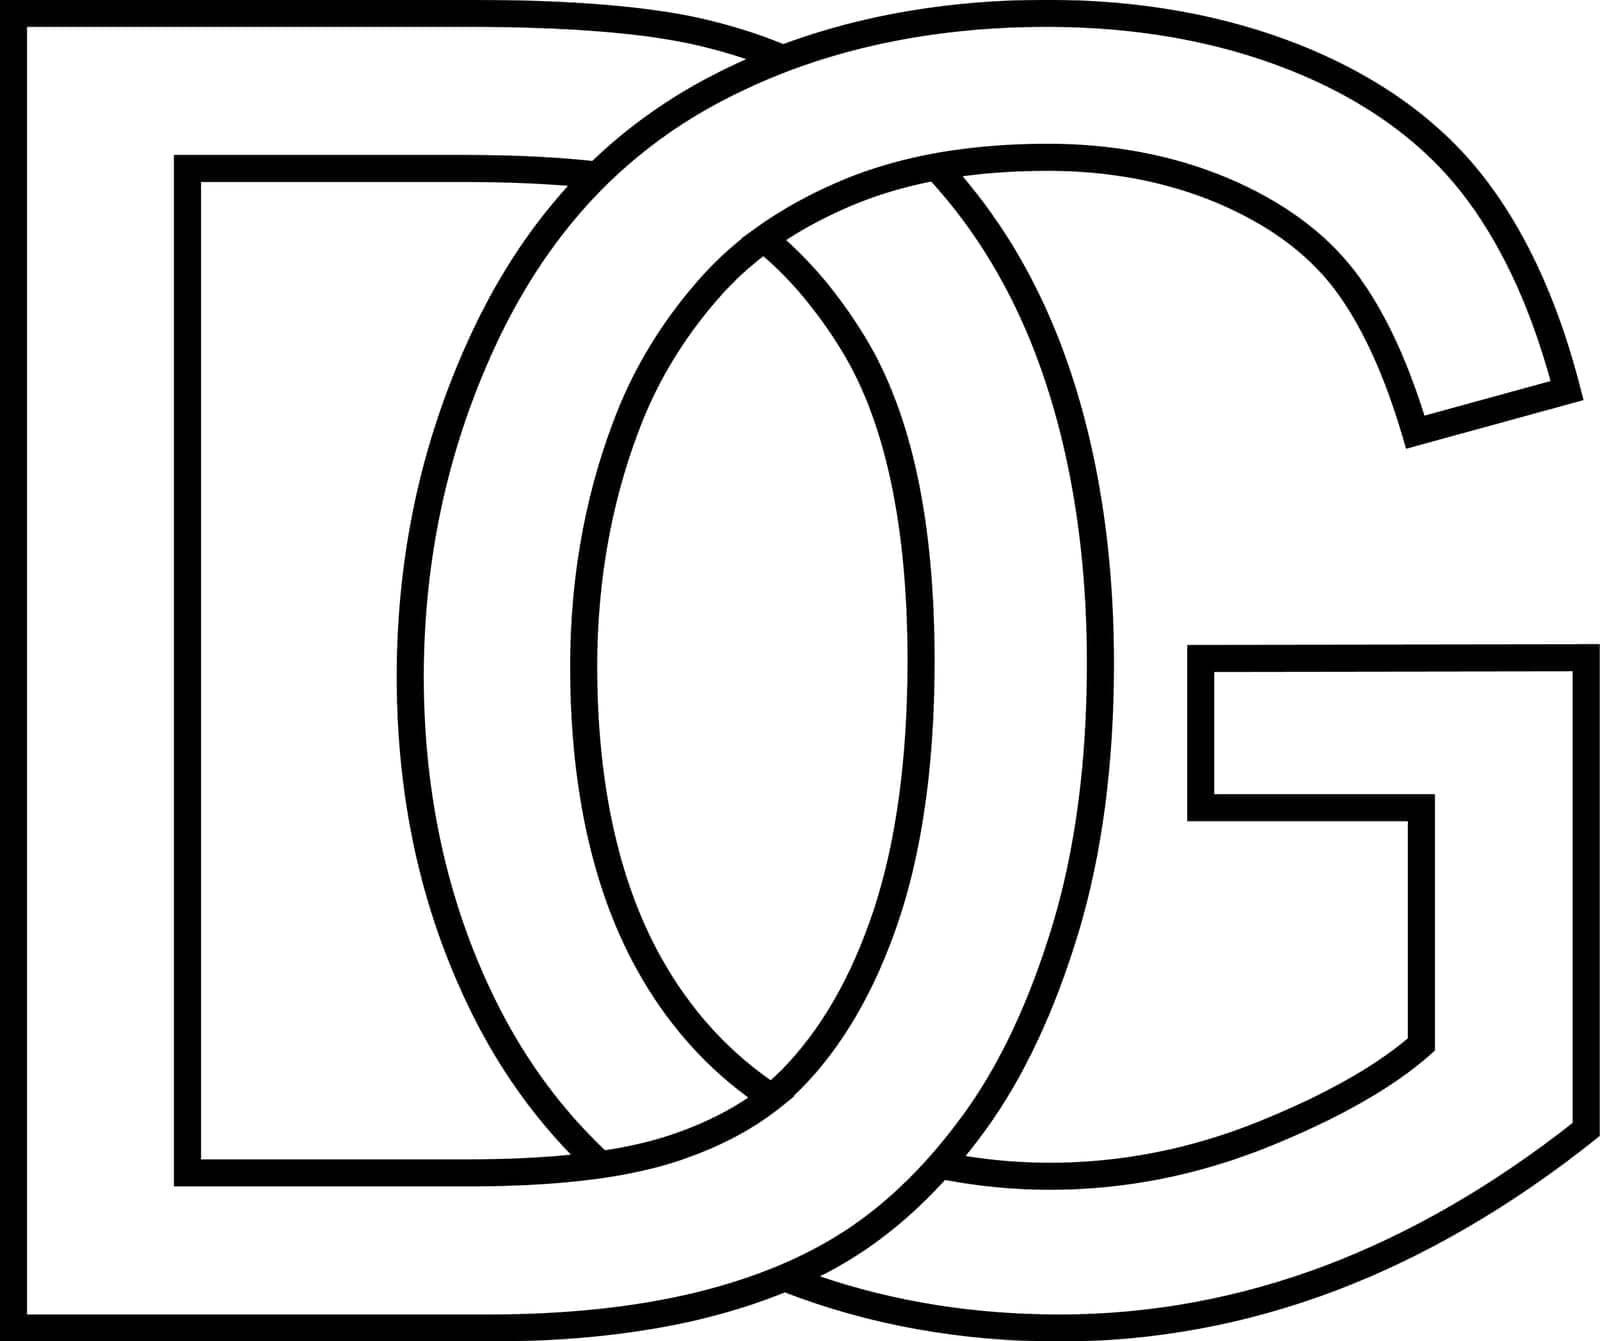 Logo sign dg gd, icon sign interlaced letters d g by koksikoks